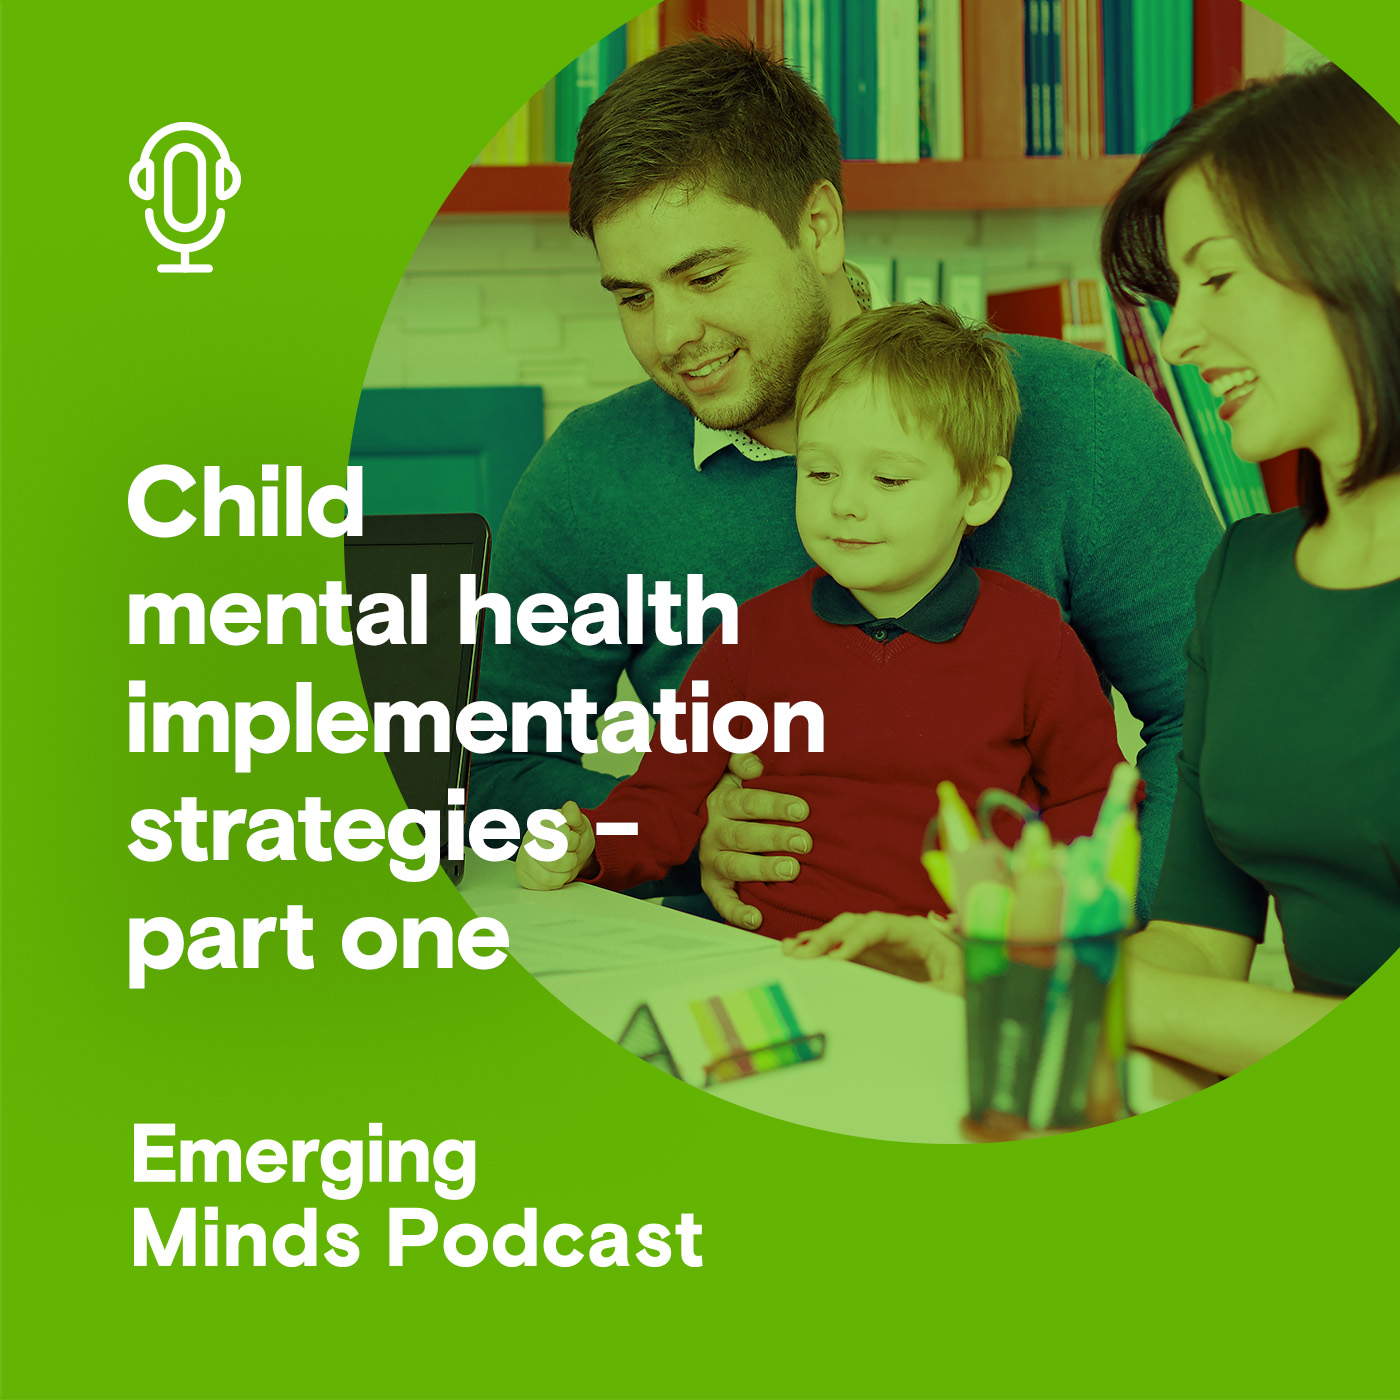 Child mental health implementation strategies - part one